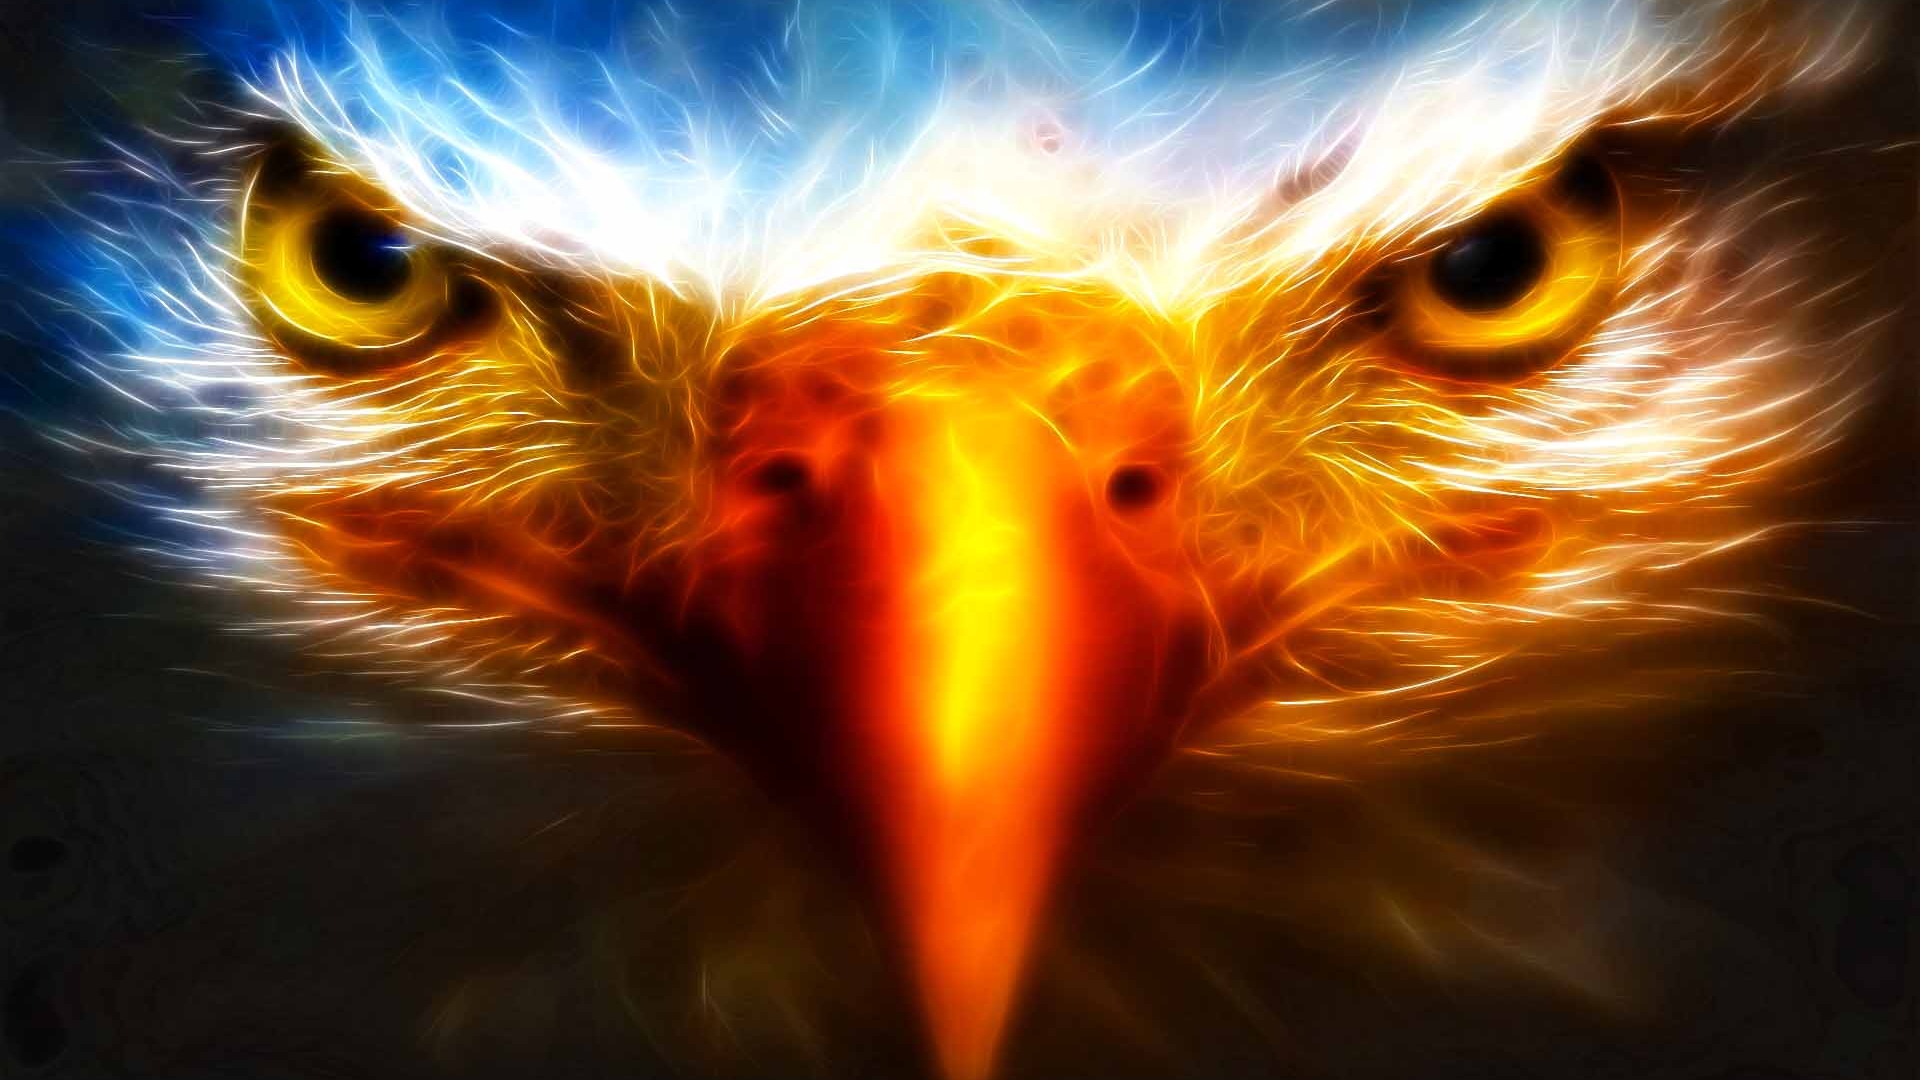 Story of an Eagle - A Very Motivational Story! MUST WATCH ...